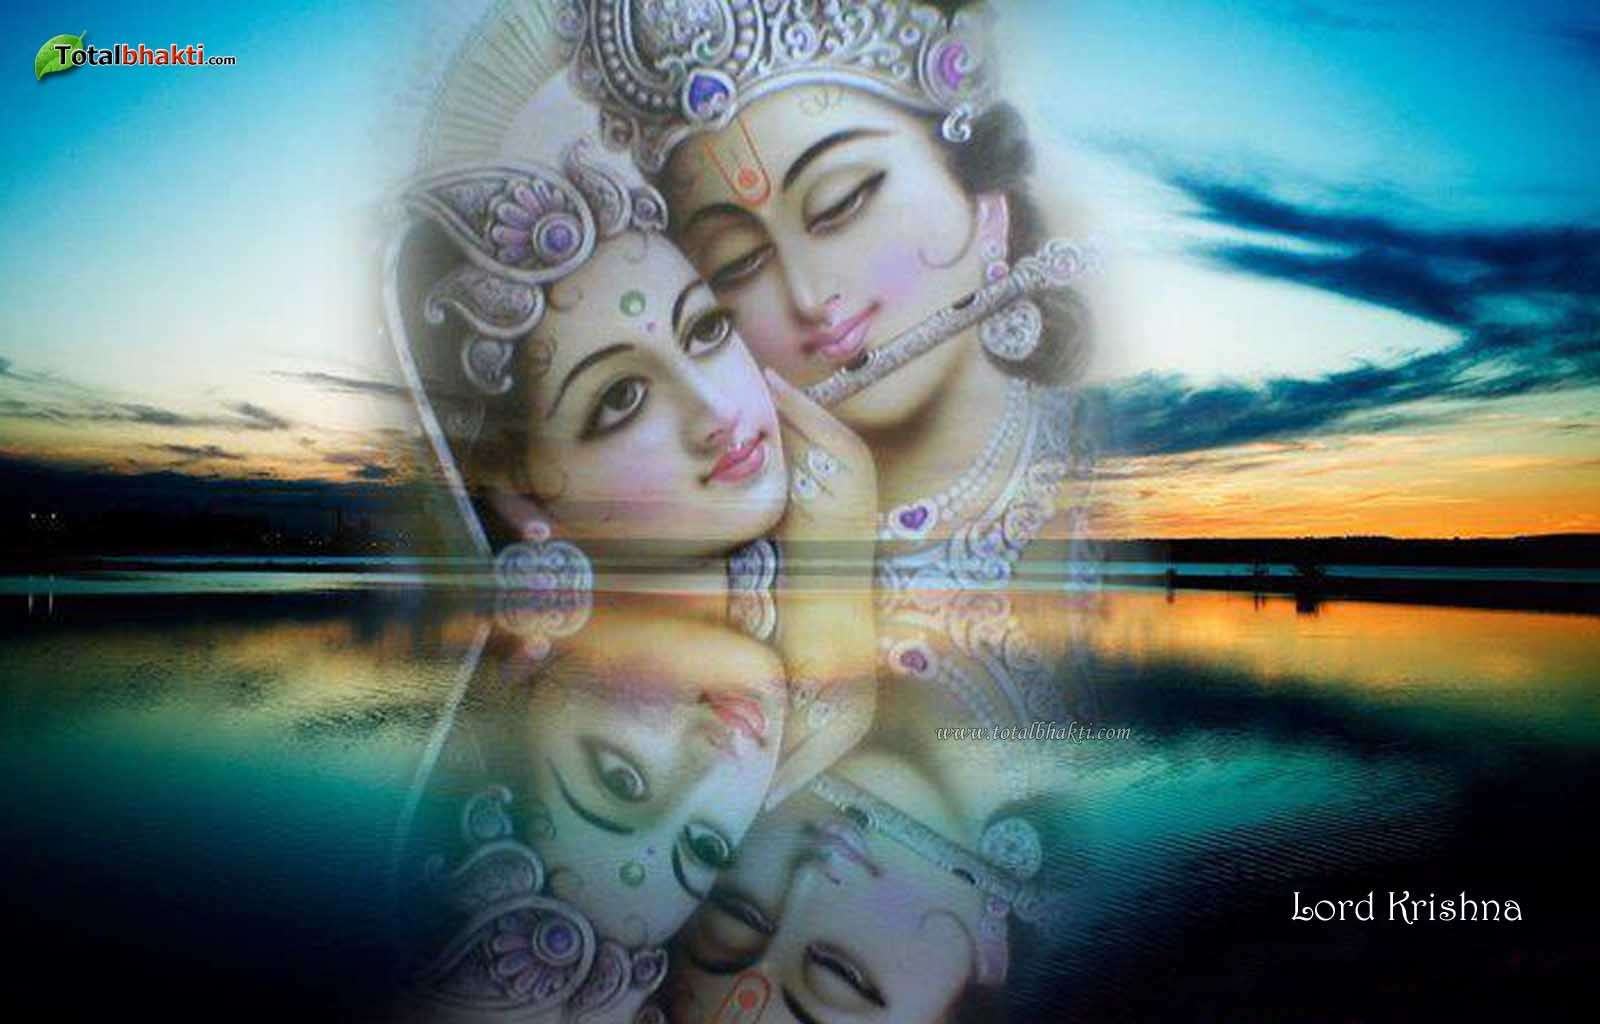  Free Wallpapers Backgrounds   Krishna wallpapers computer system